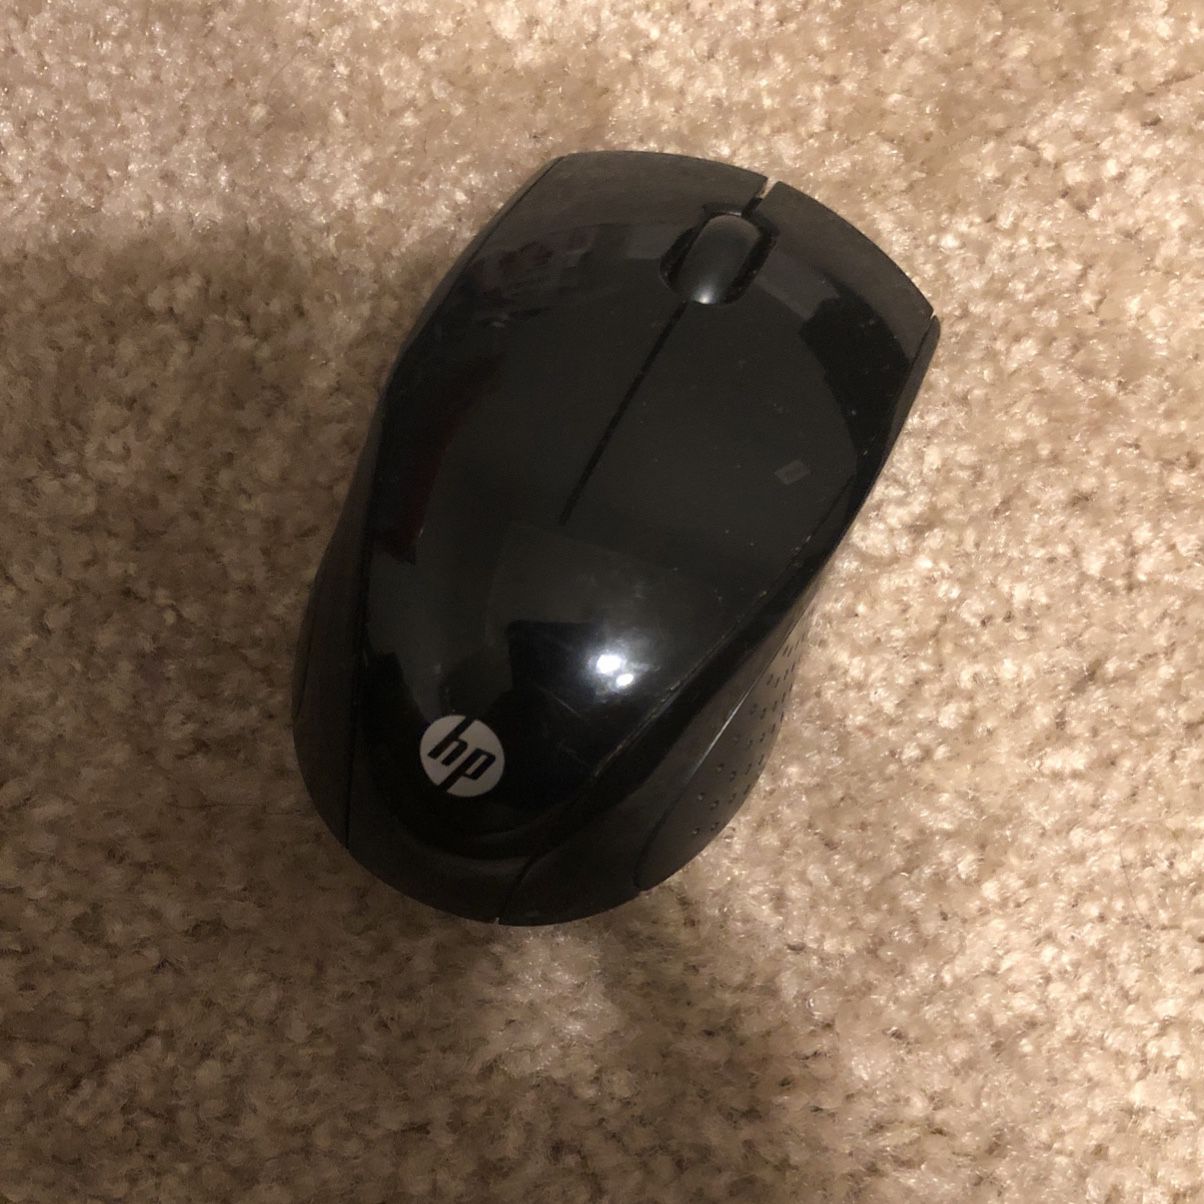 Hp Bluetooth Mouse For Laptops